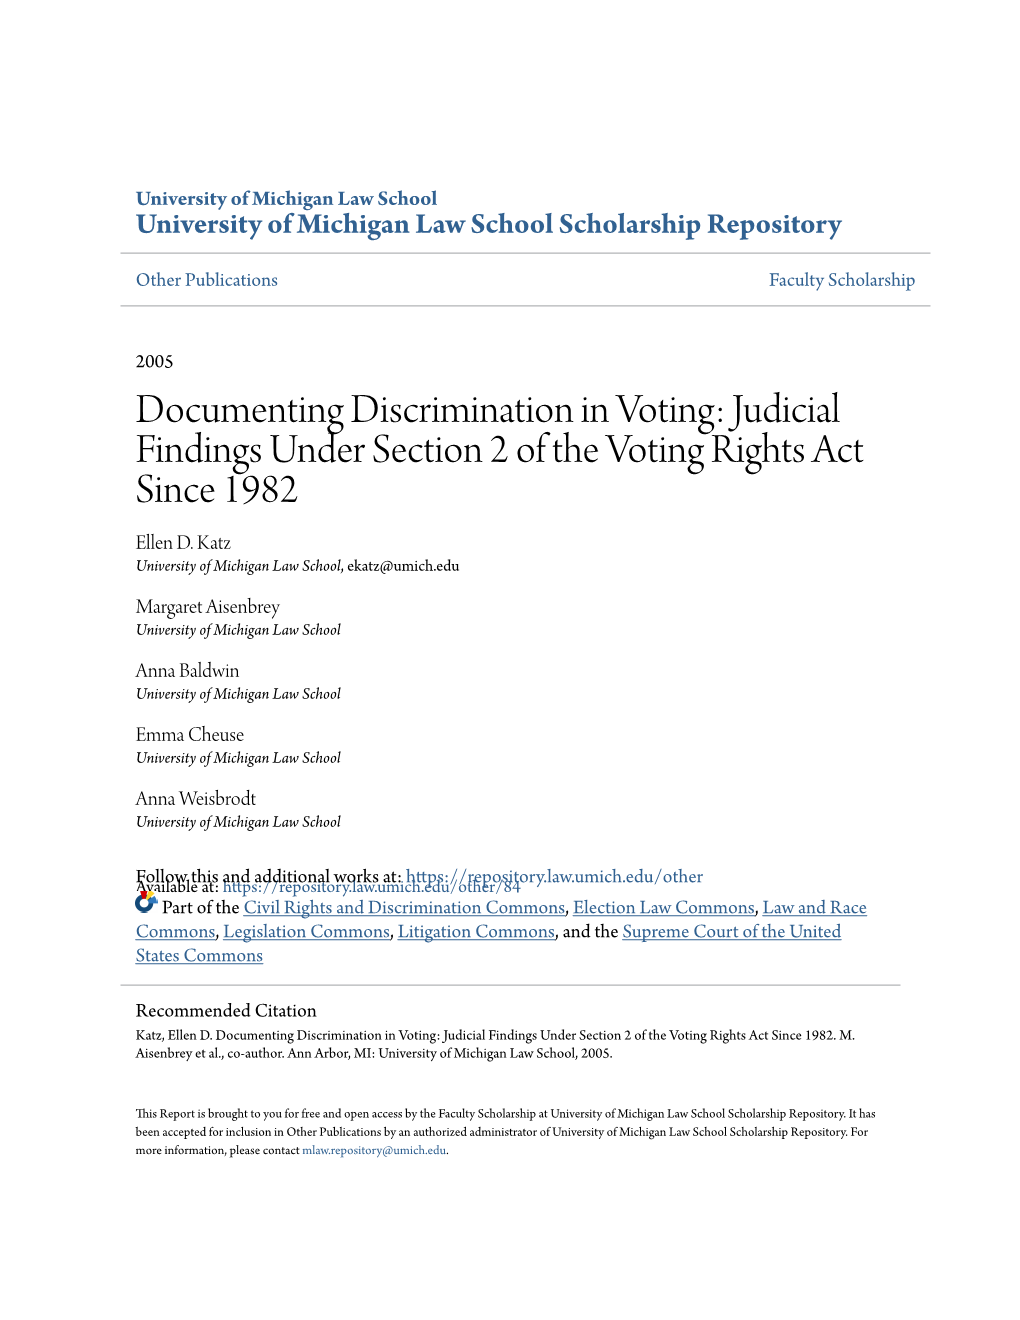 Documenting Discrimination in Voting: Judicial Findings Under Section 2 of the Voting Rights Act Since 1982 Ellen D